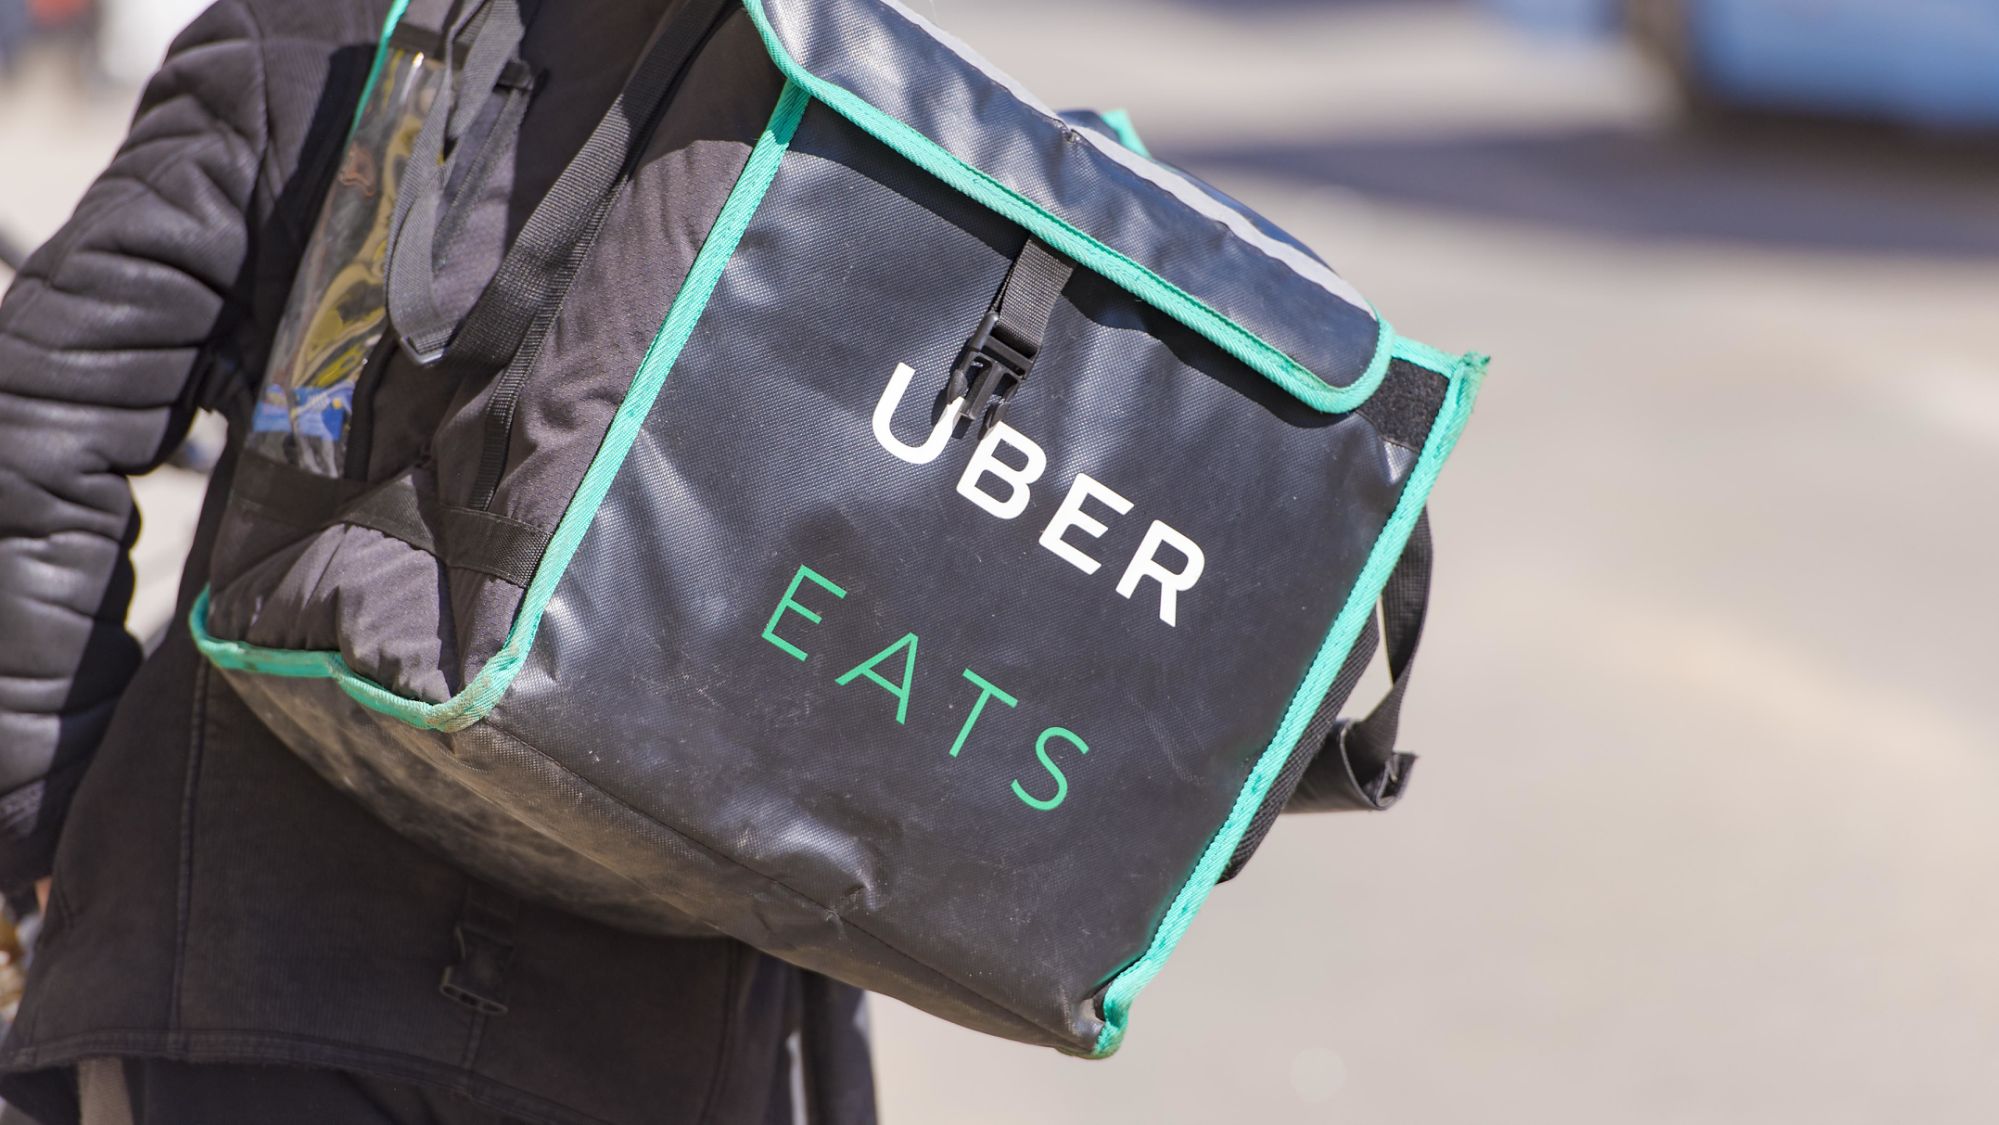 A café owner shares her frustration over Uber Eats’ use of her company for unauthorized listing